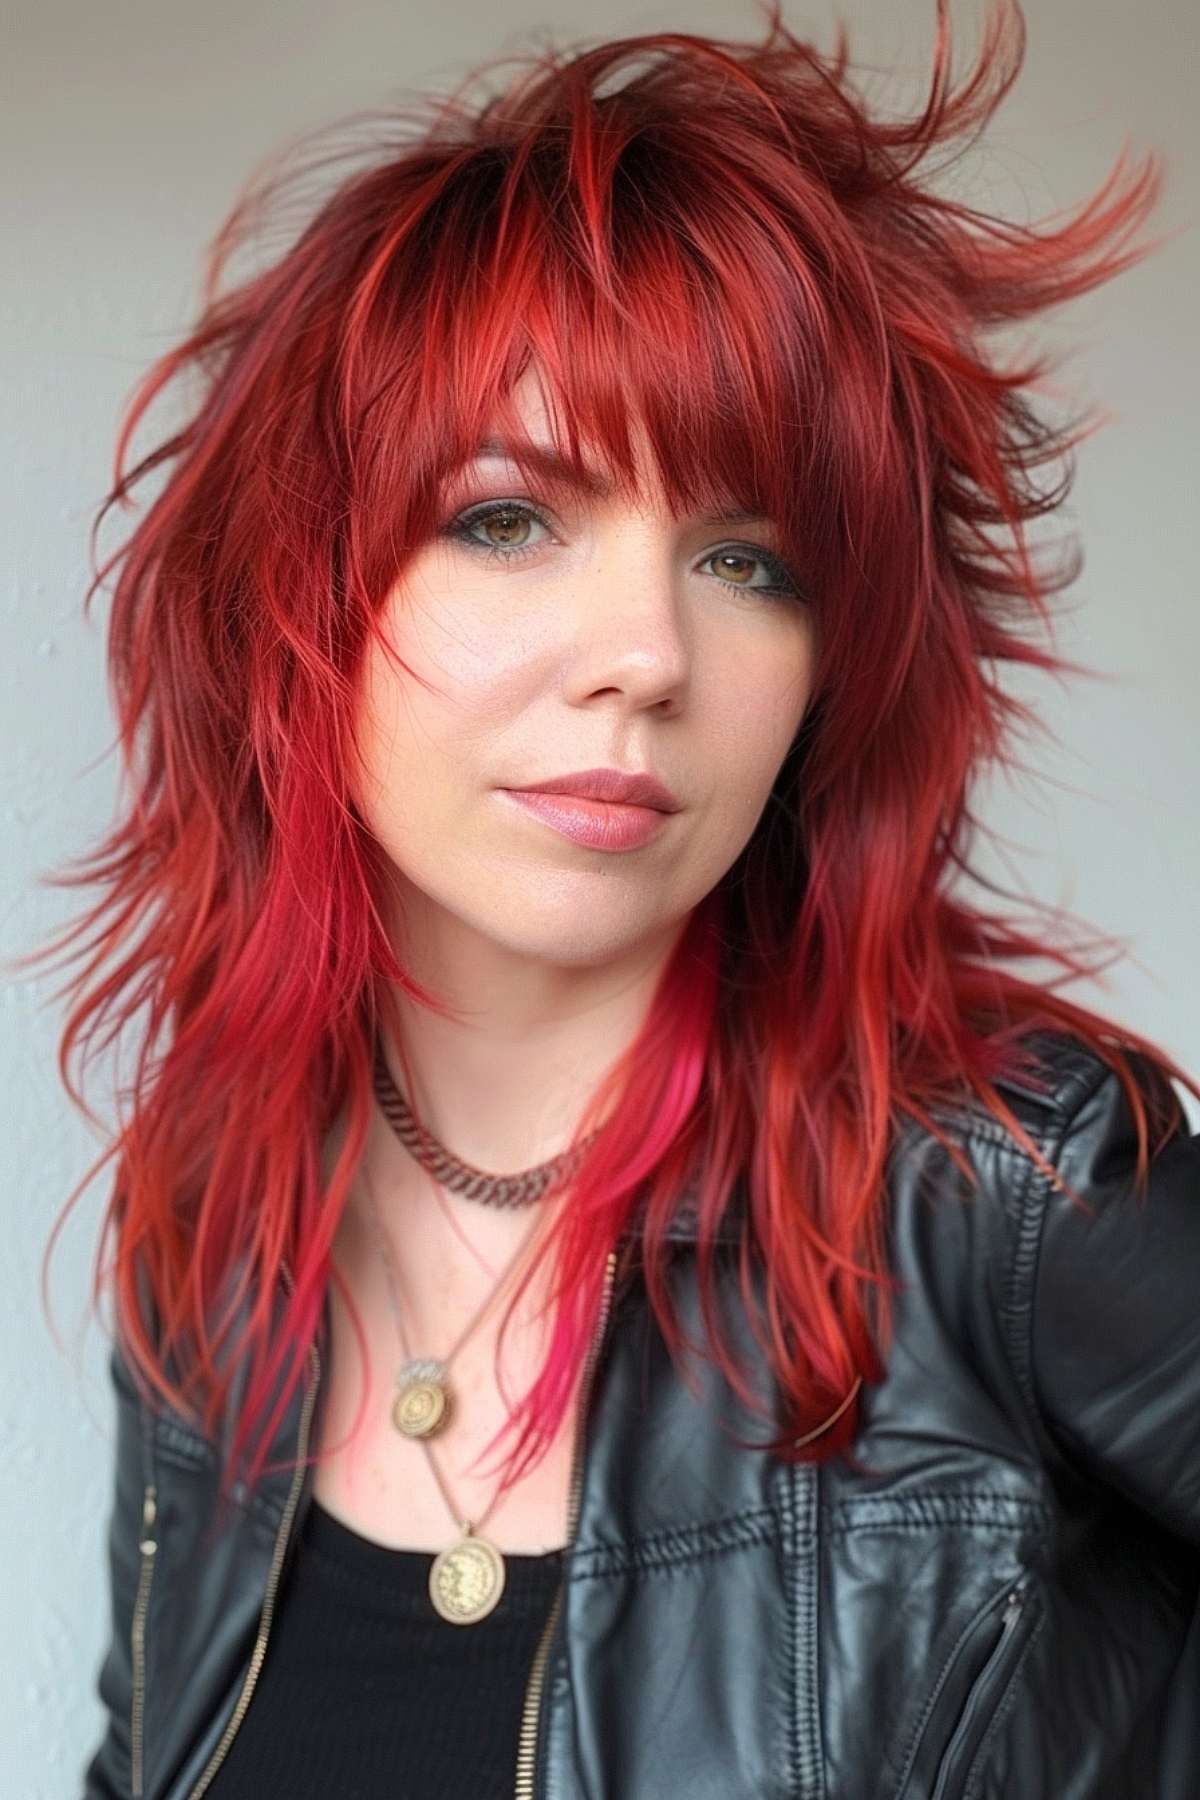 Woman with bright red hair in a Wolf Cut, highlighting textured layers and a bold color choice.